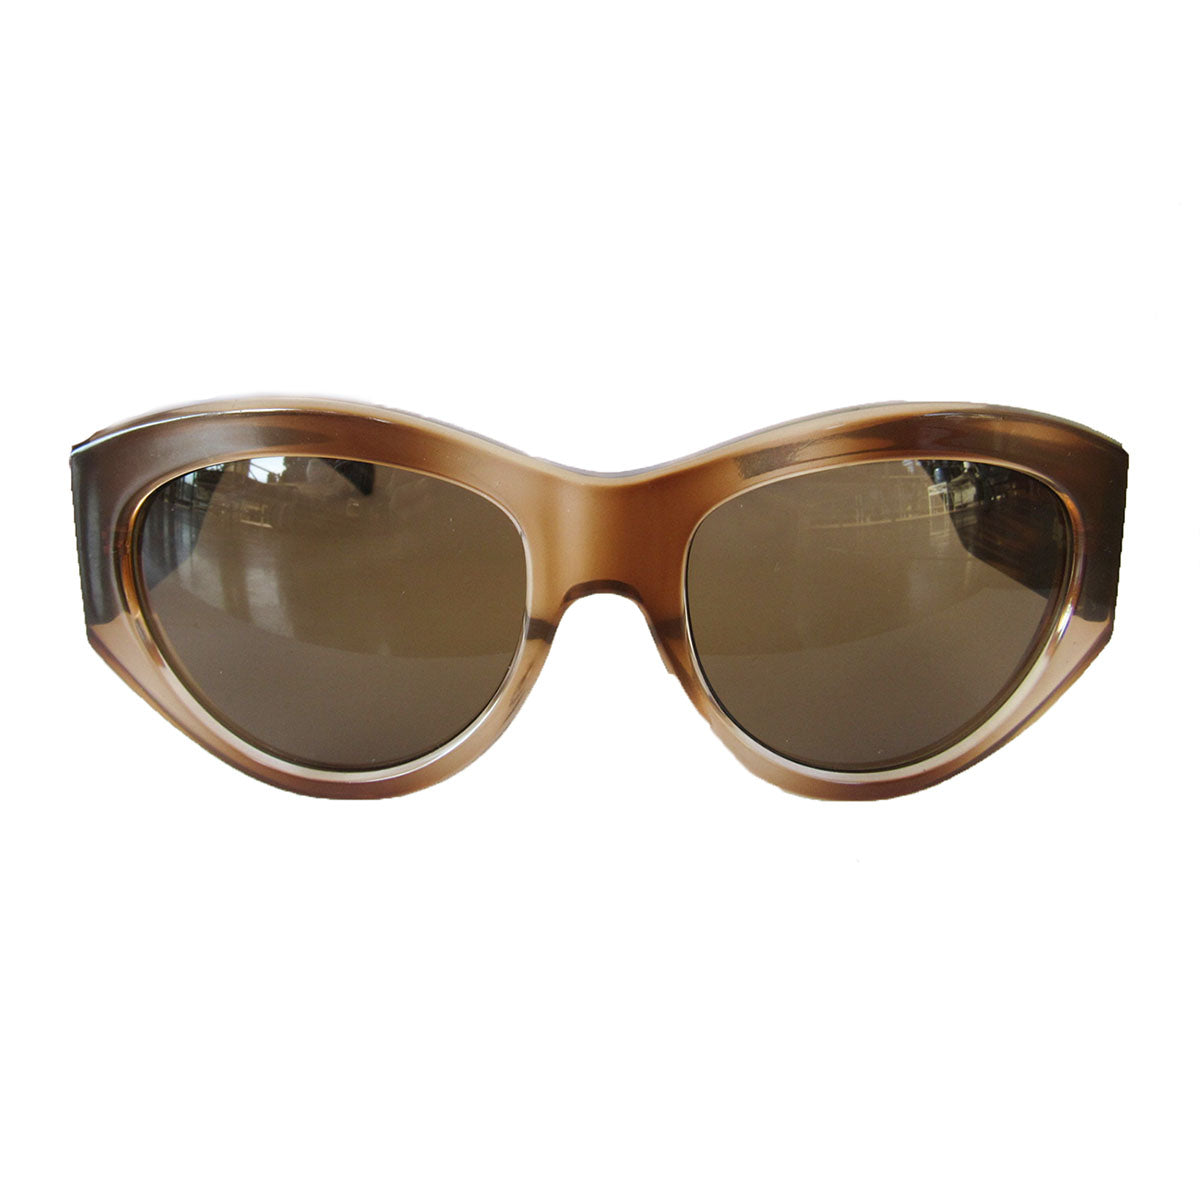 Mask Style Honey Coloured Sunglasses w/ Wooden Pattern Arms and Hazel Lenses